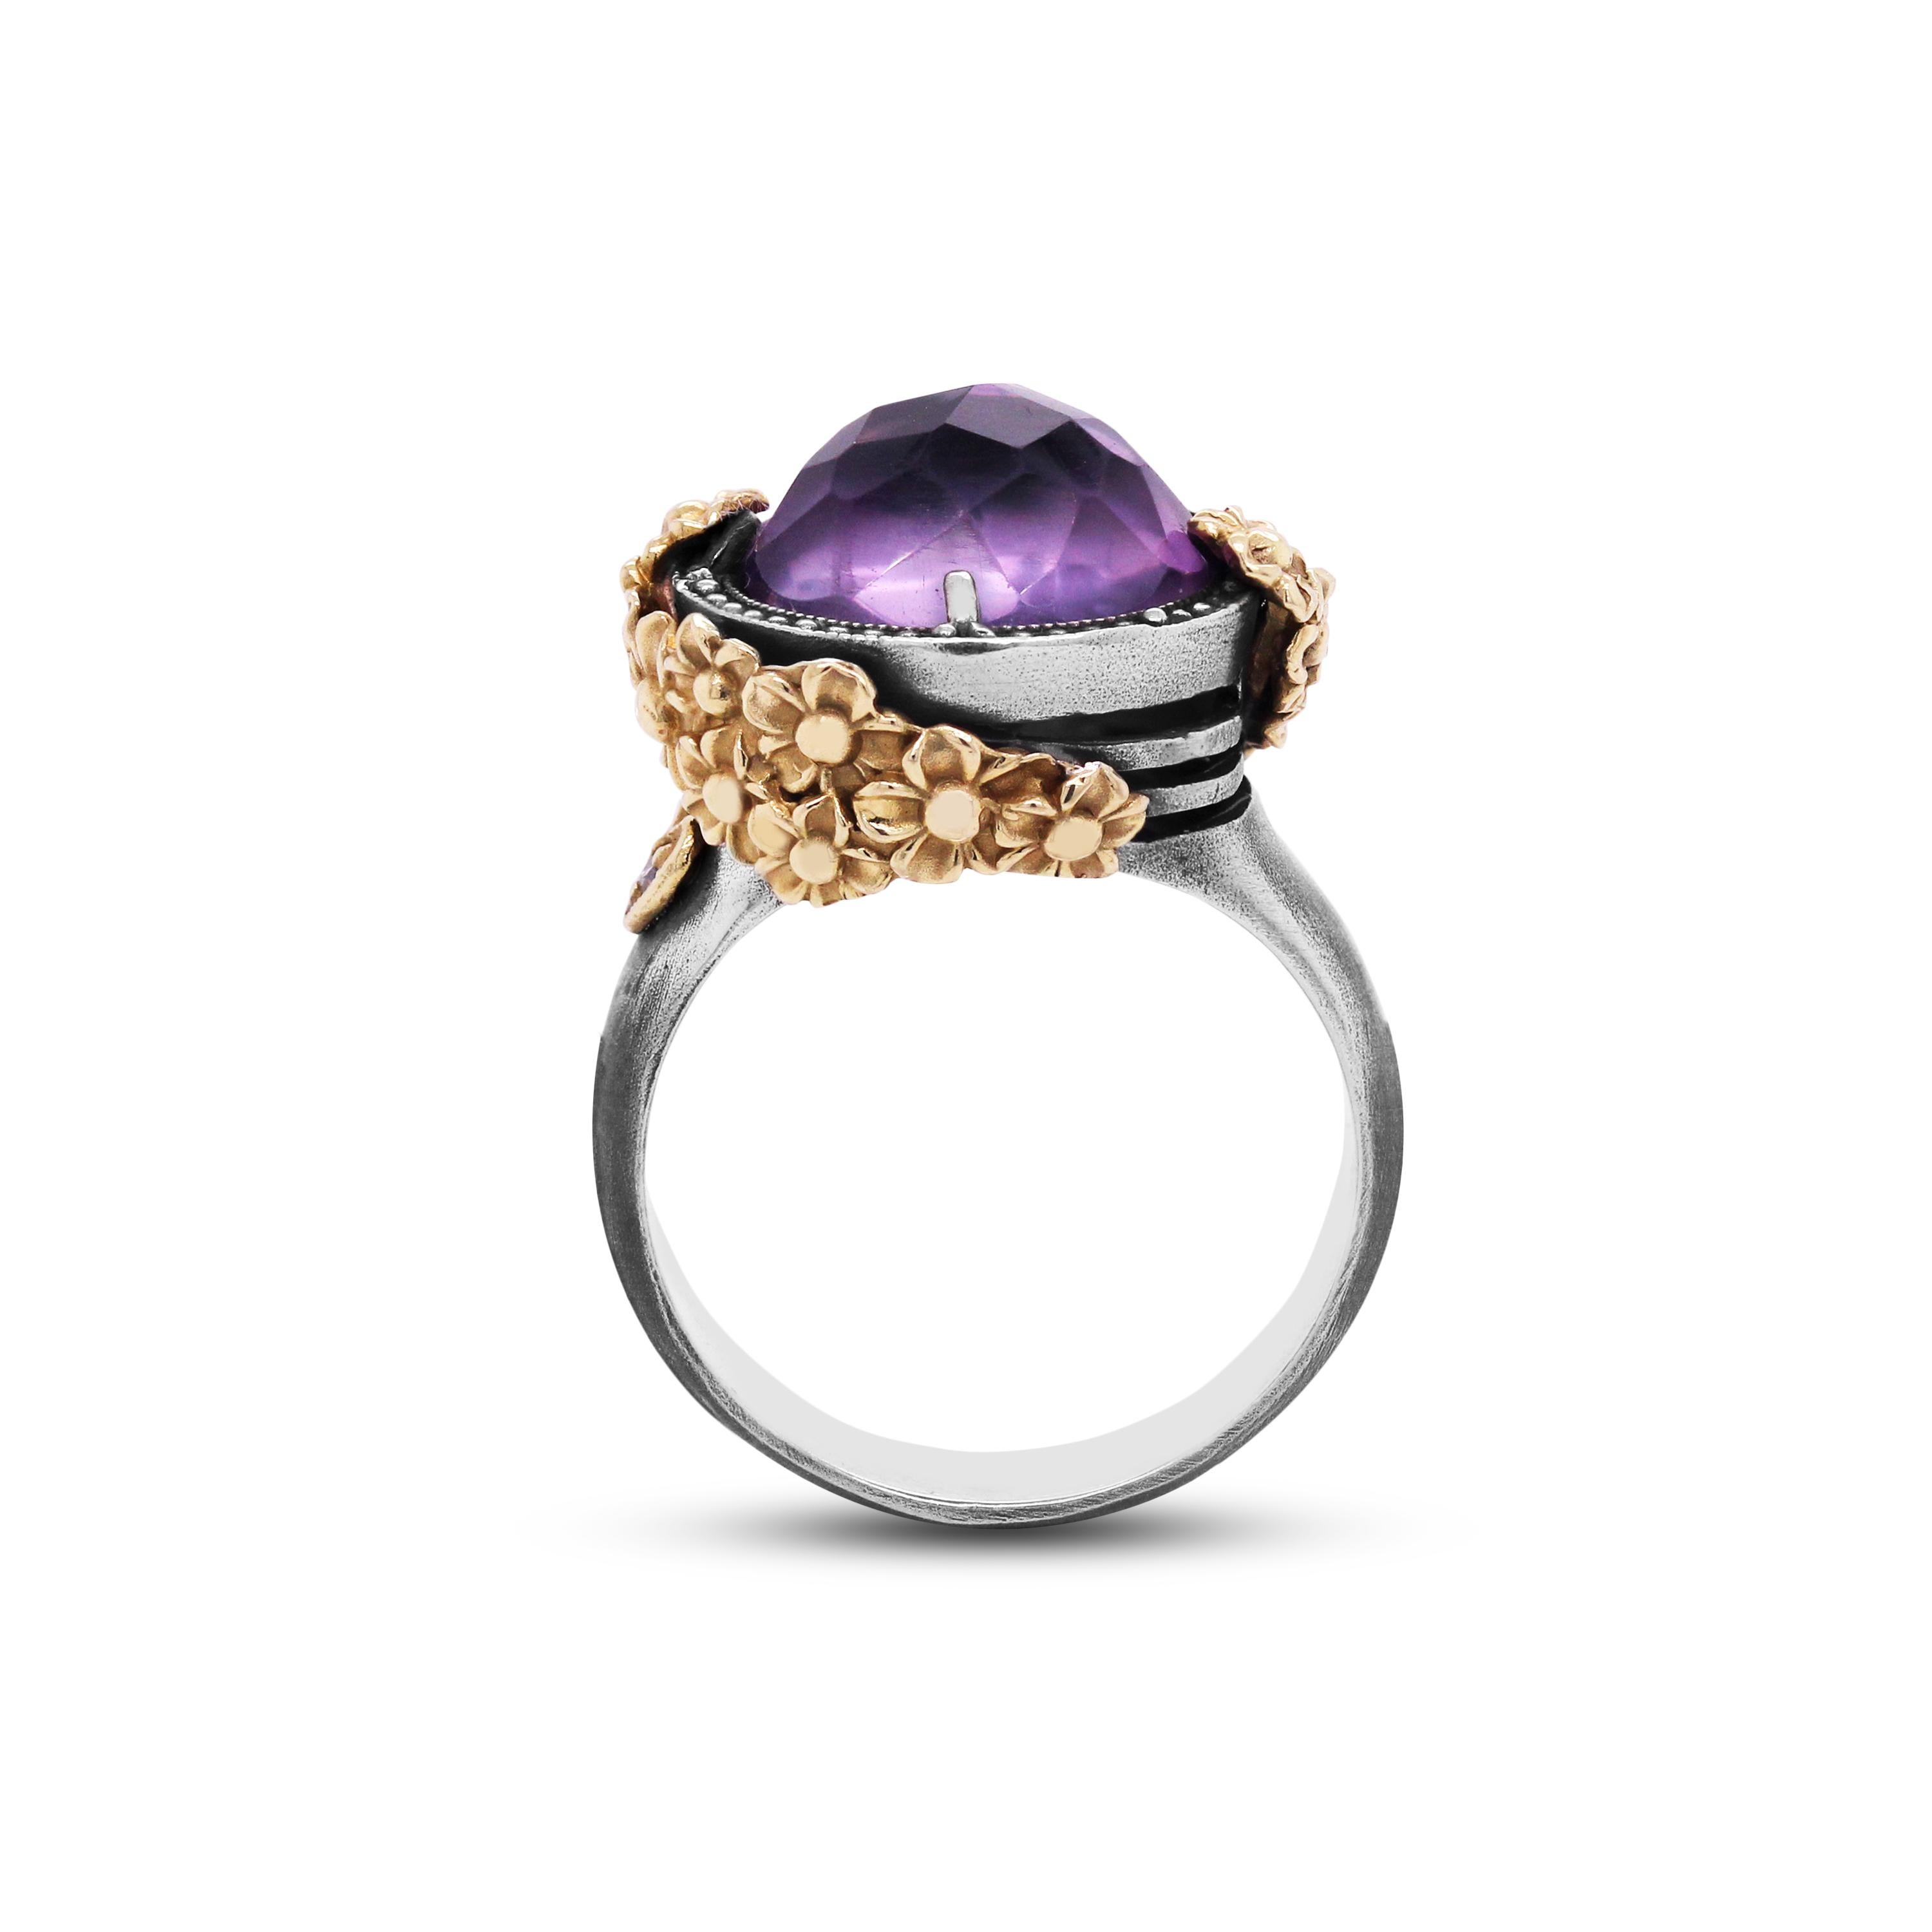 Aged Sterling Silver and 18K Gold Floral Rose Garden Ring with Amethyst center by Stambolian

This fun and incredible ring by Stambolian features a unique twisted rose covering the entire ring

Special cut Amethyst center, apprx. 10 carat

0.65 inch